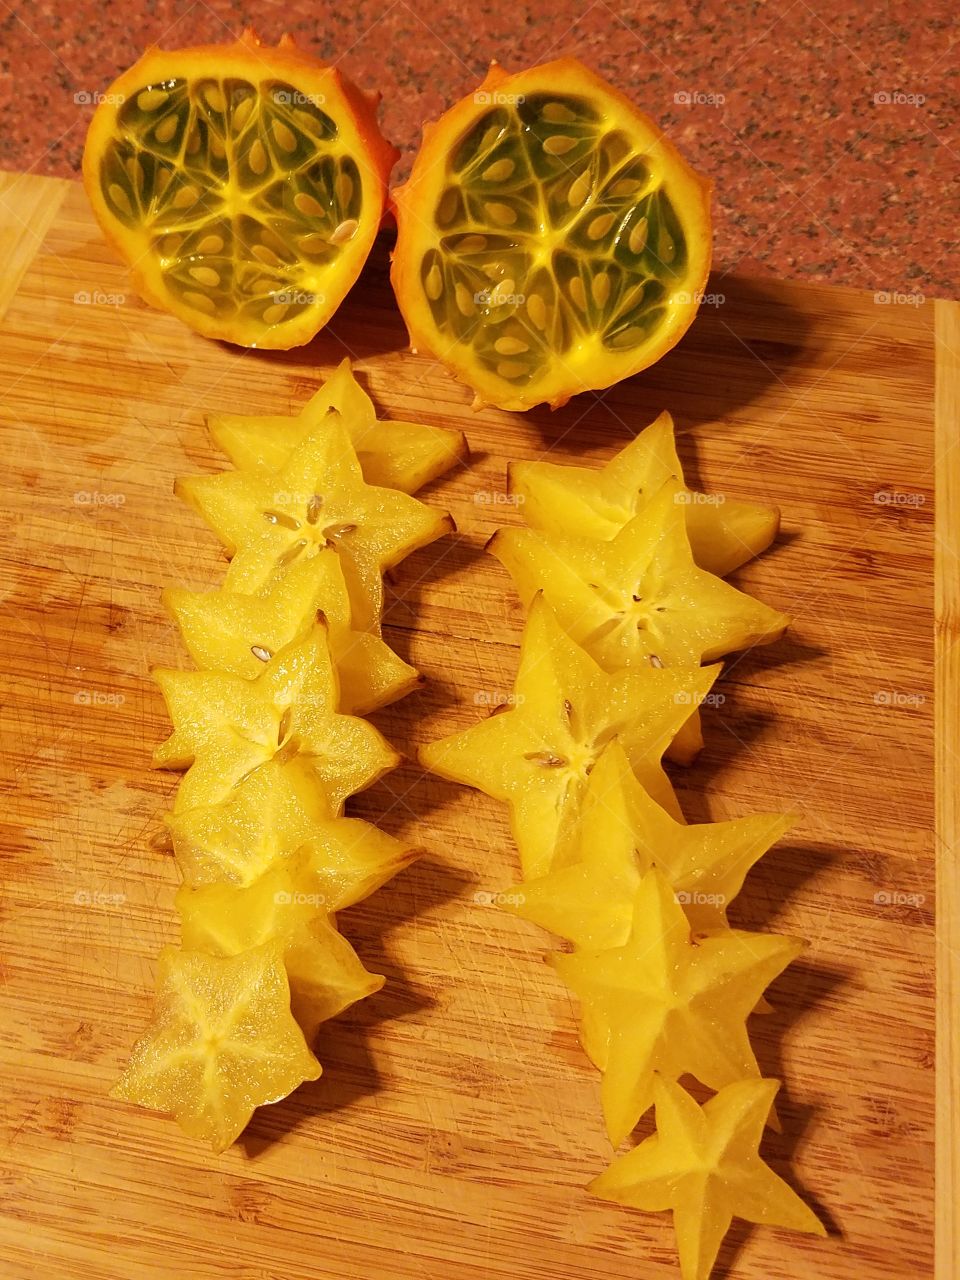 Stars and fruit